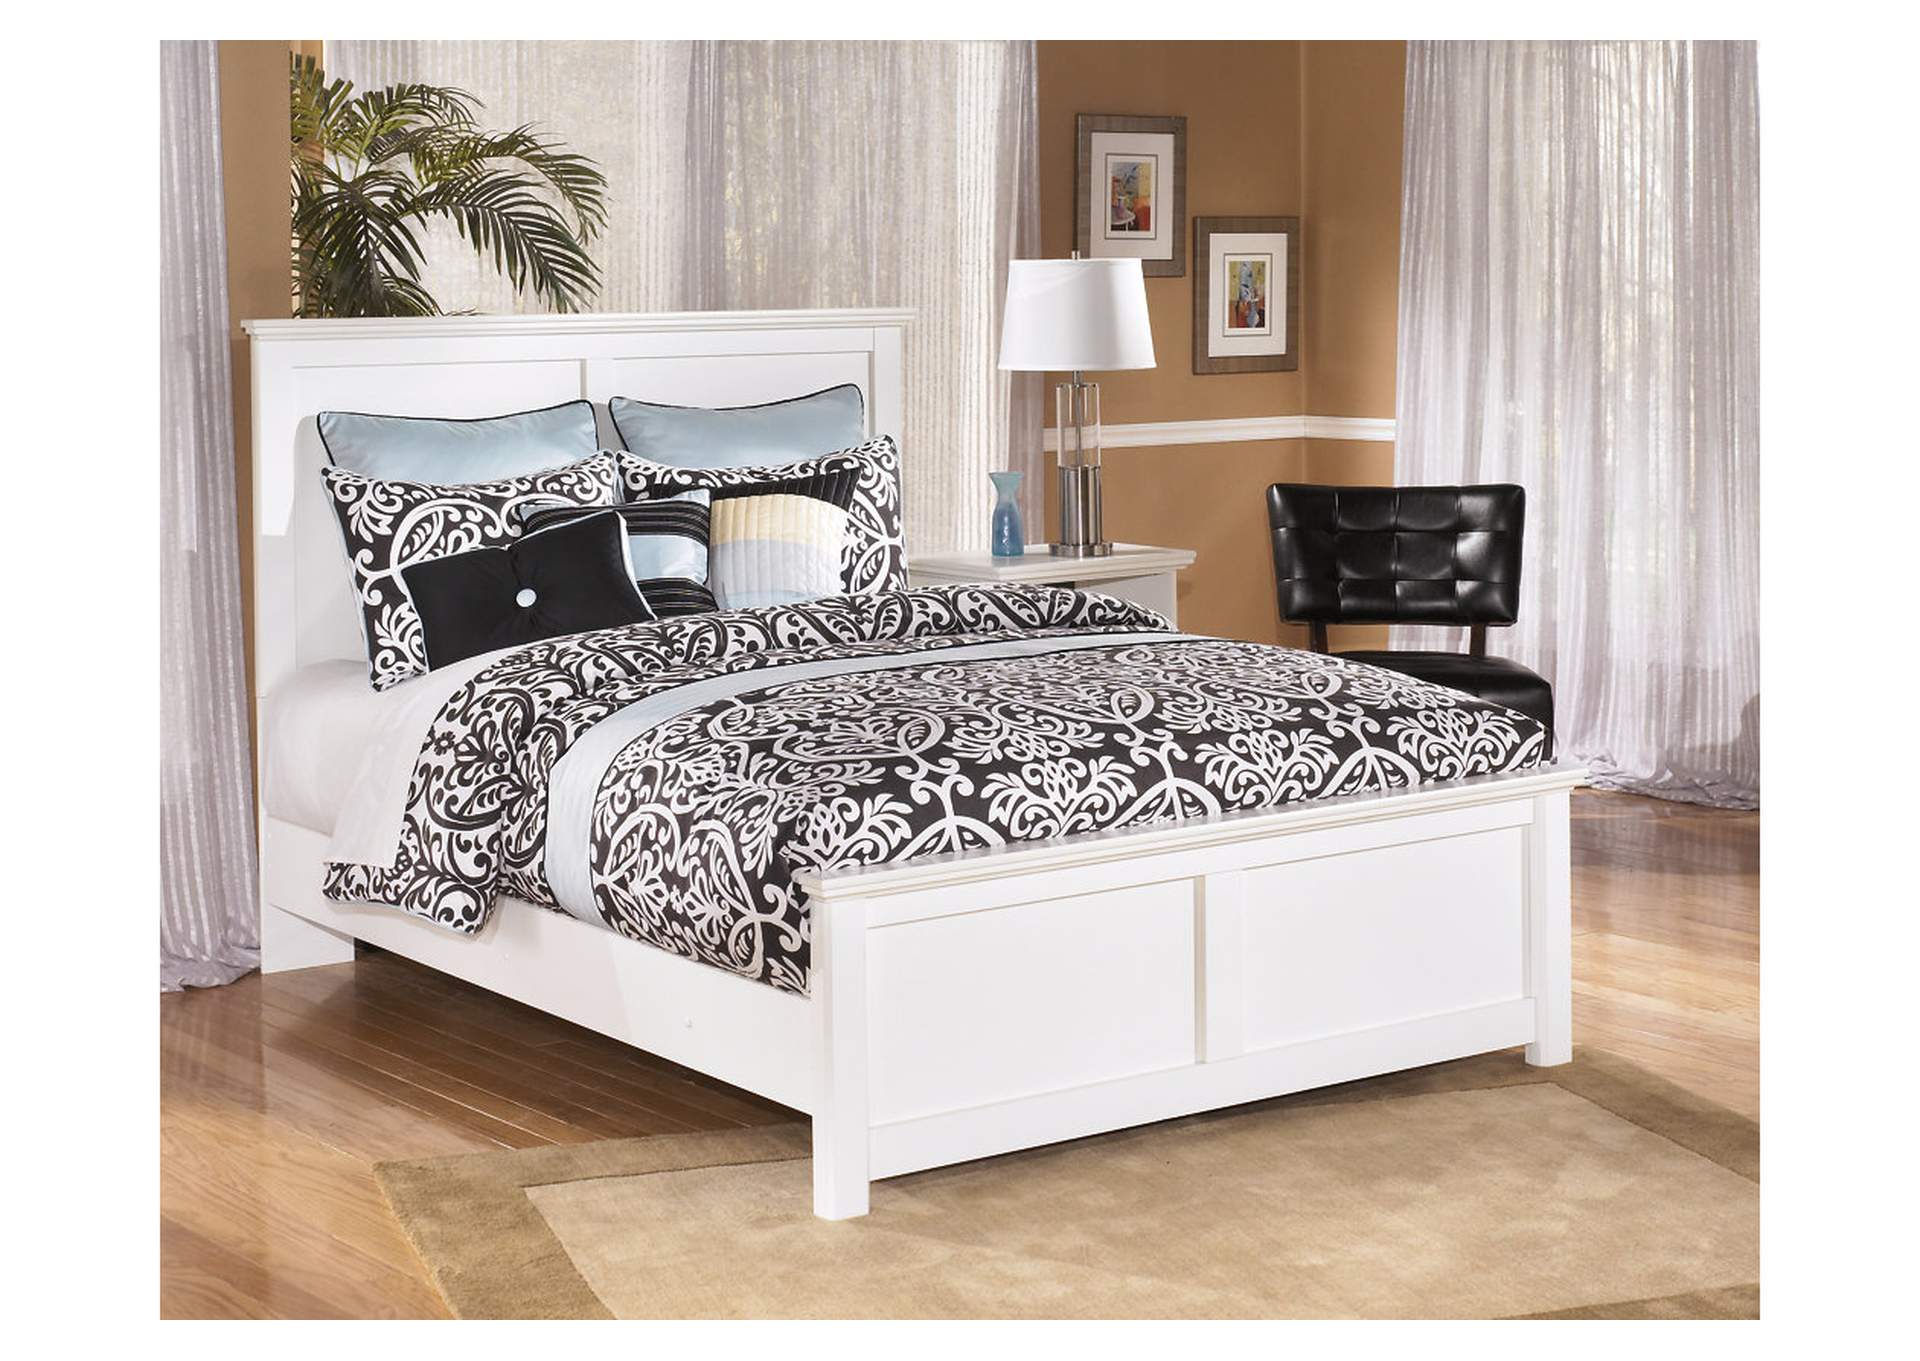 Bostwick Shoals Queen Panel Bed, Dresser, Mirror and 2 Nightstands,Signature Design By Ashley